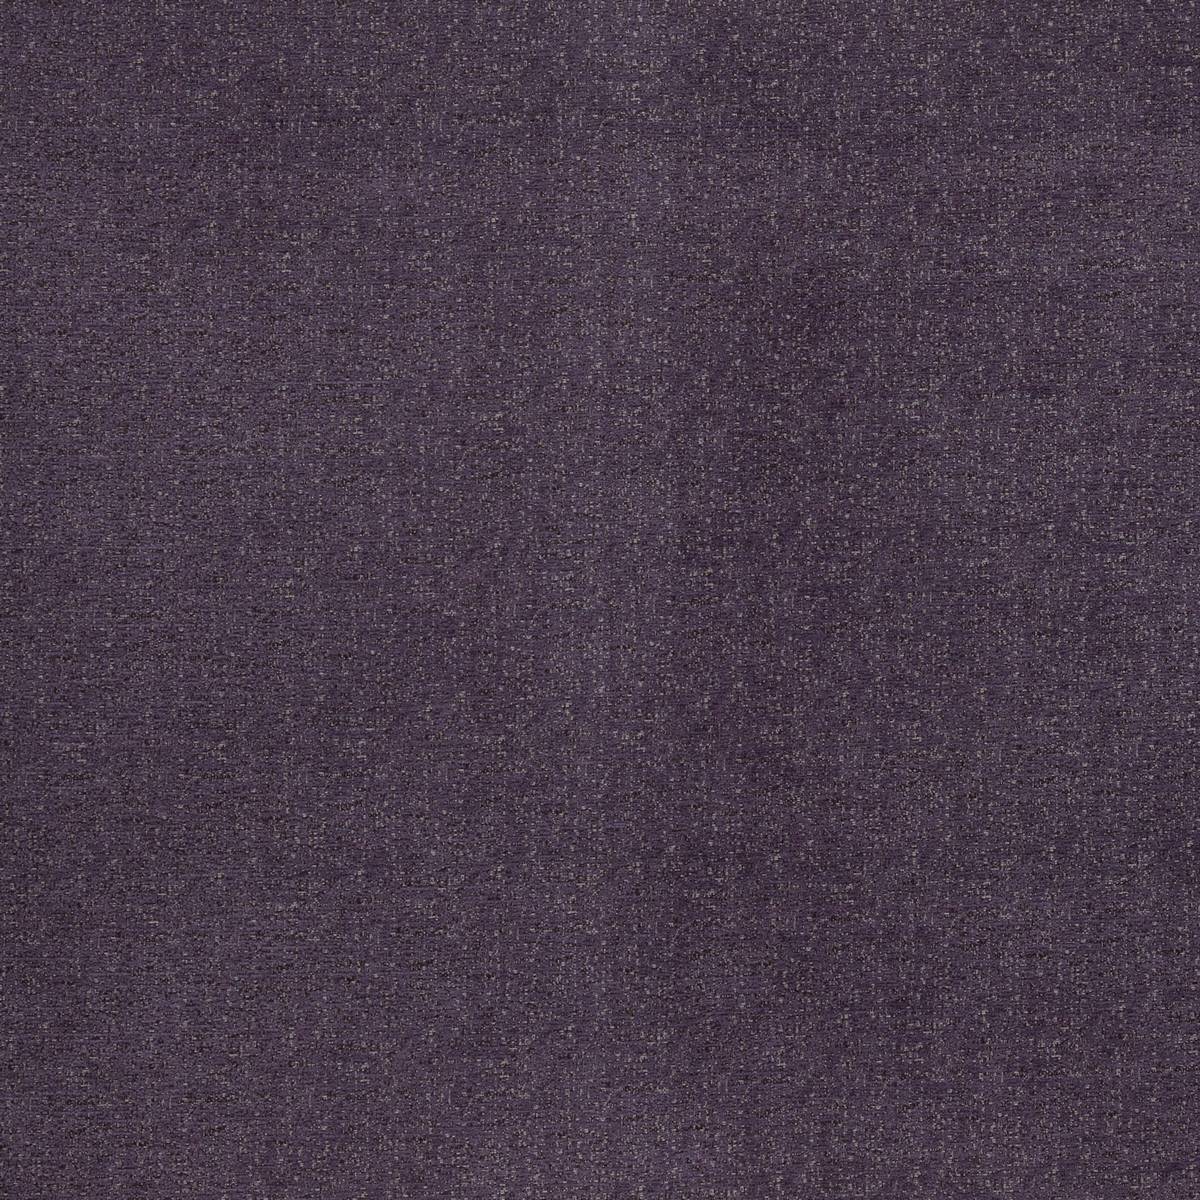 Ryedale Heather Fabric by iLiv